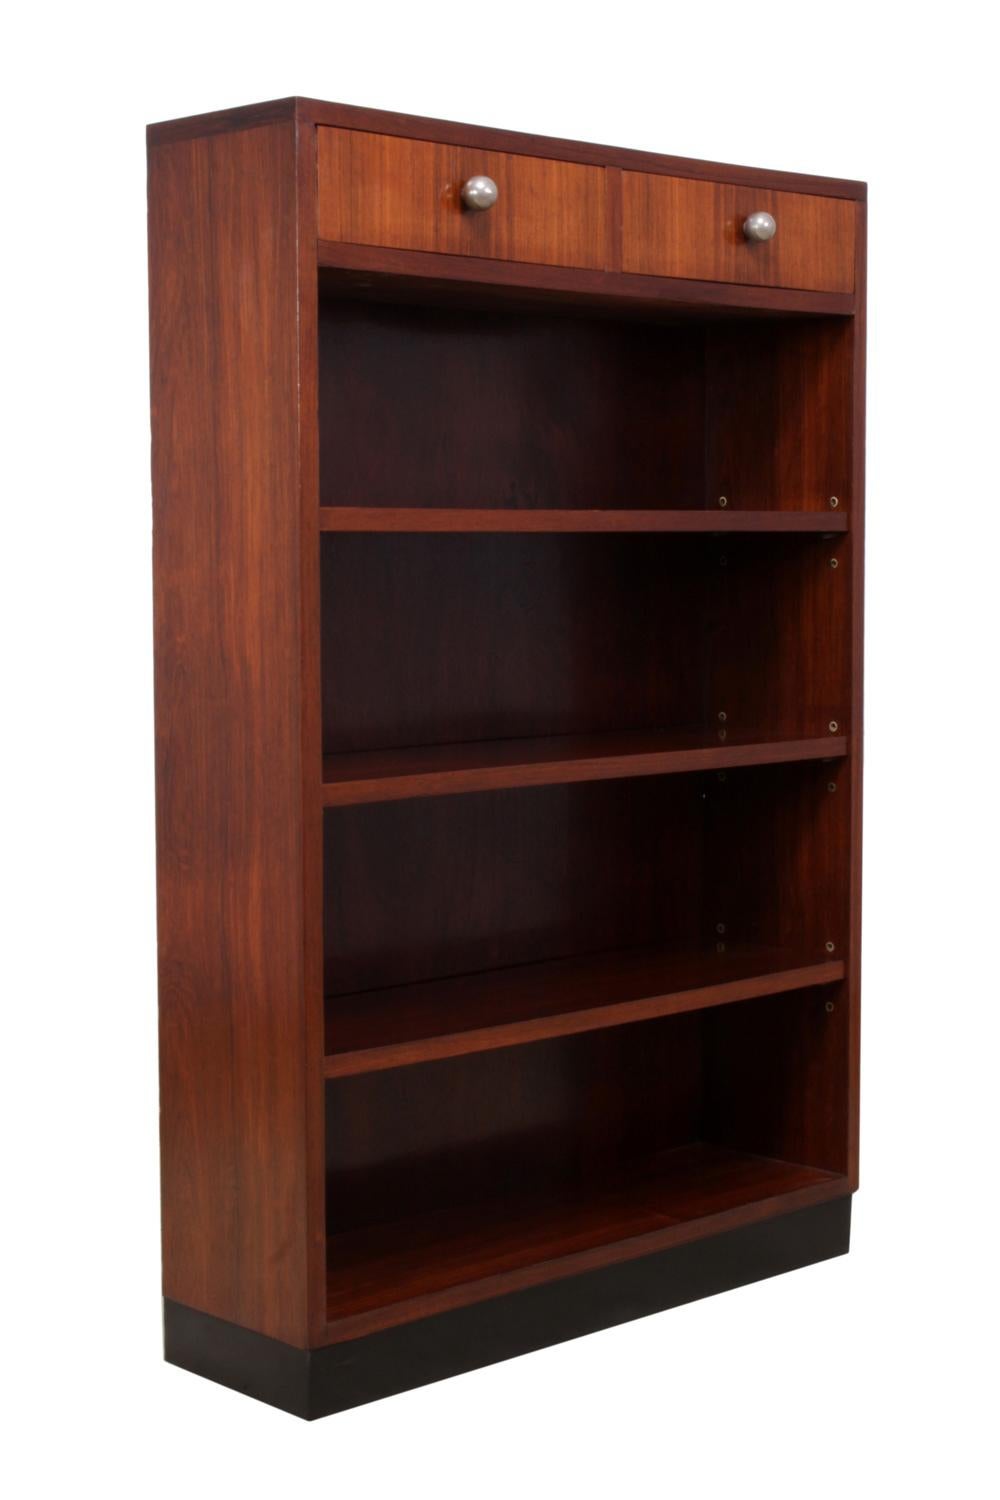 Art Deco open bookcase in rosewood
a very simple open bookcase with two top drawers with pewter handles and three adjustable shelves below

the bookcase has been fully restored and hand polished

Age: circa 1920

Style: Art Deco

Material: